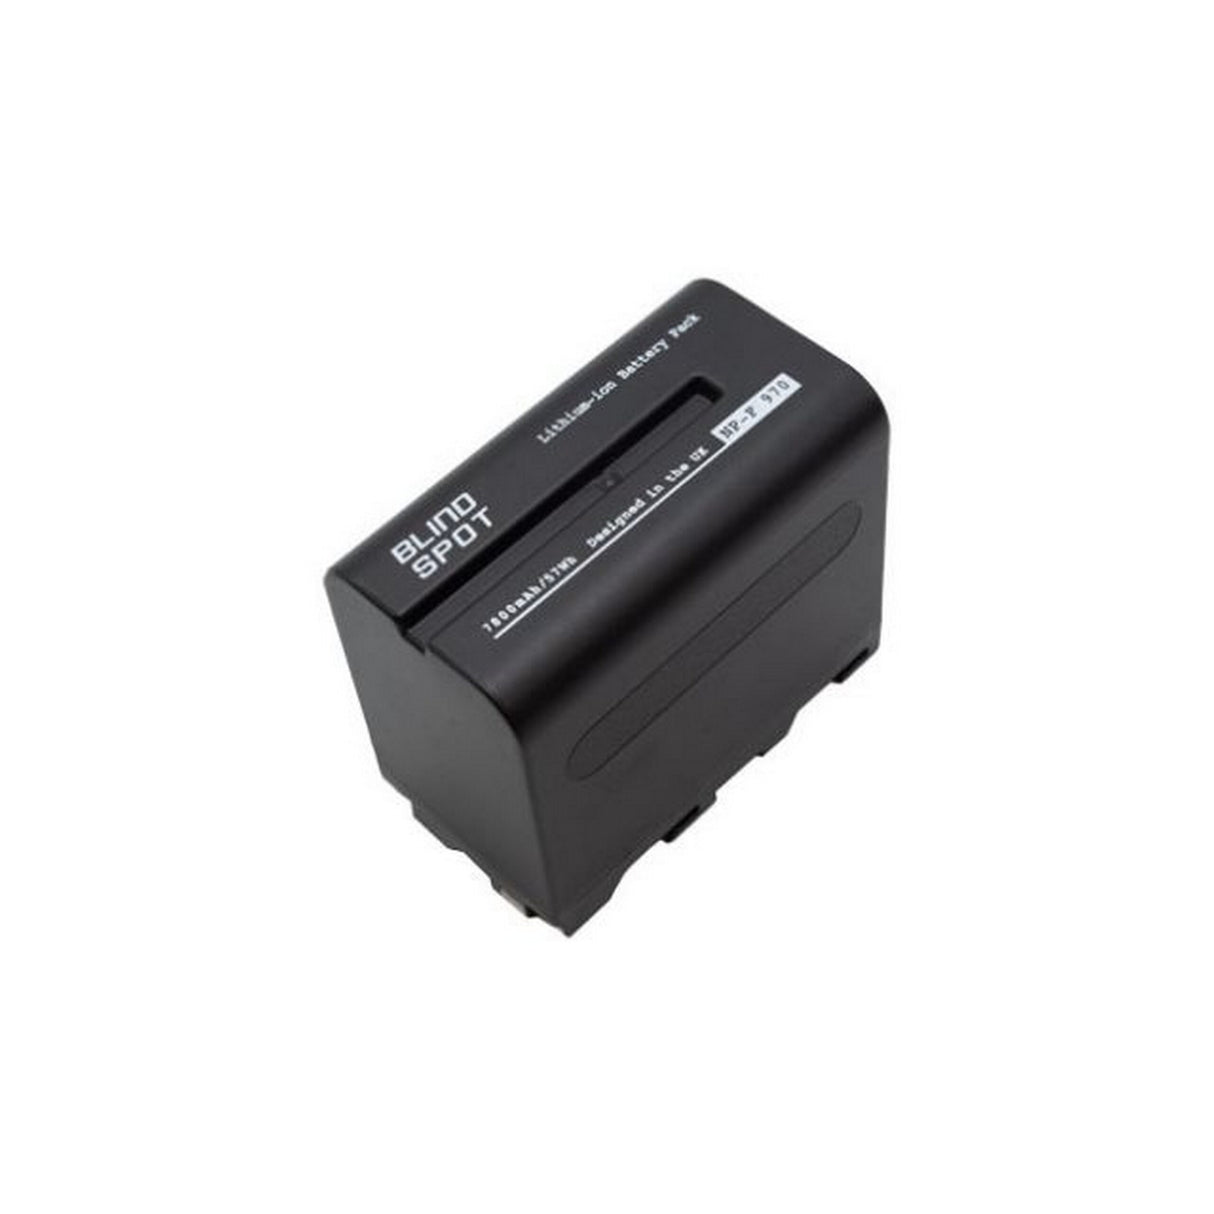 Blind Spot Gear Lithium-Ion Battery for Sony NP-F970, 1302-019-01